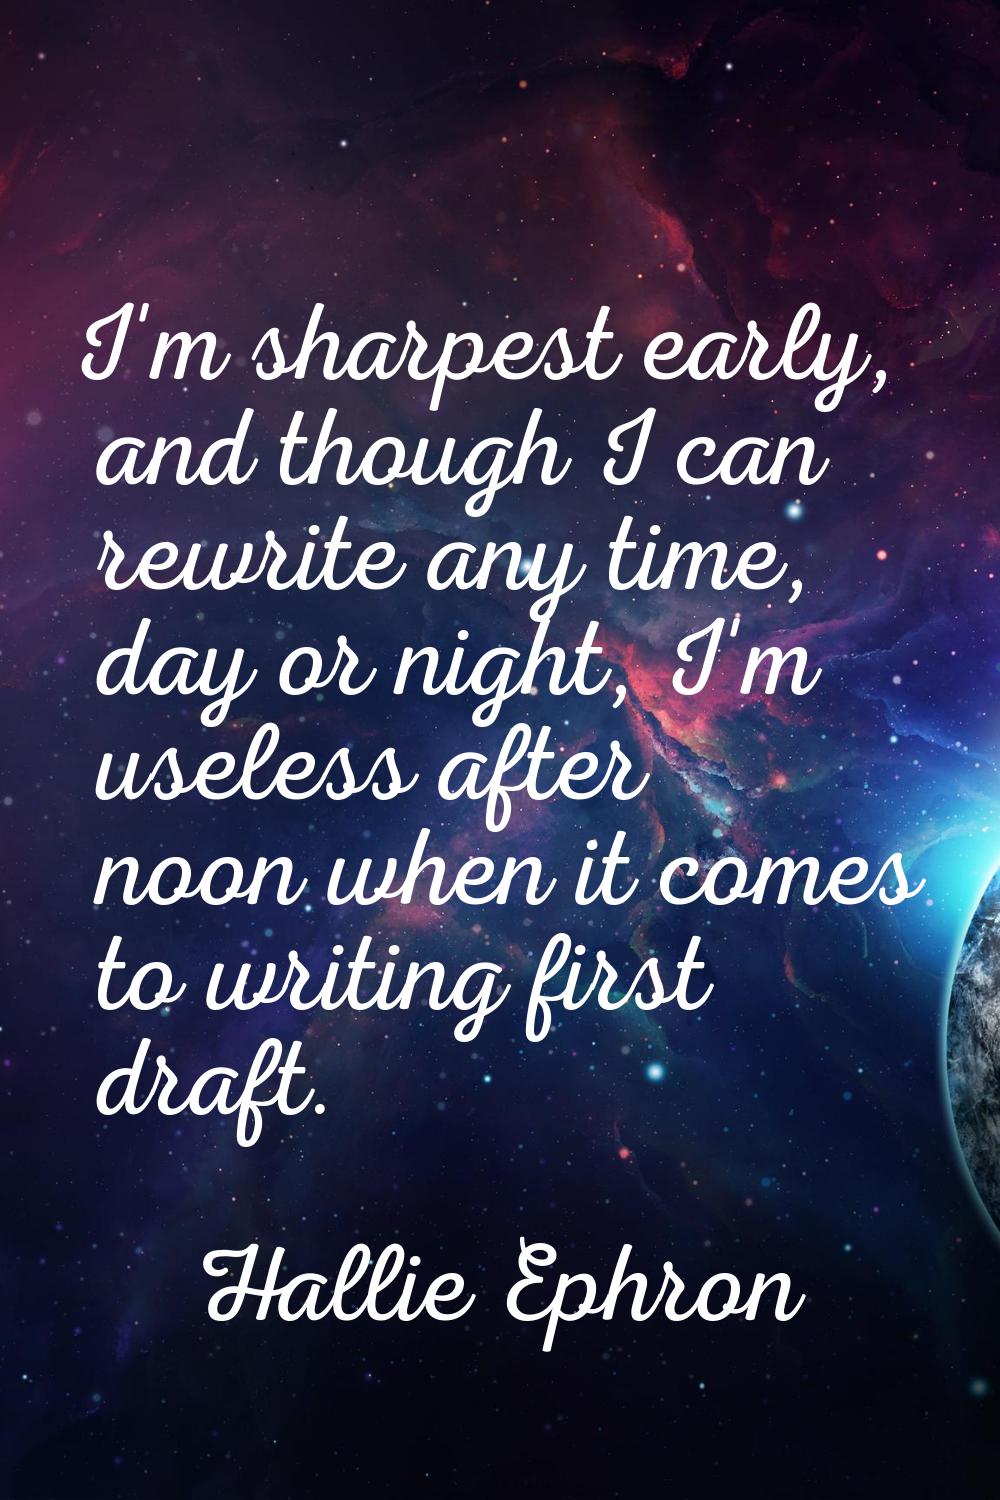 I'm sharpest early, and though I can rewrite any time, day or night, I'm useless after noon when it